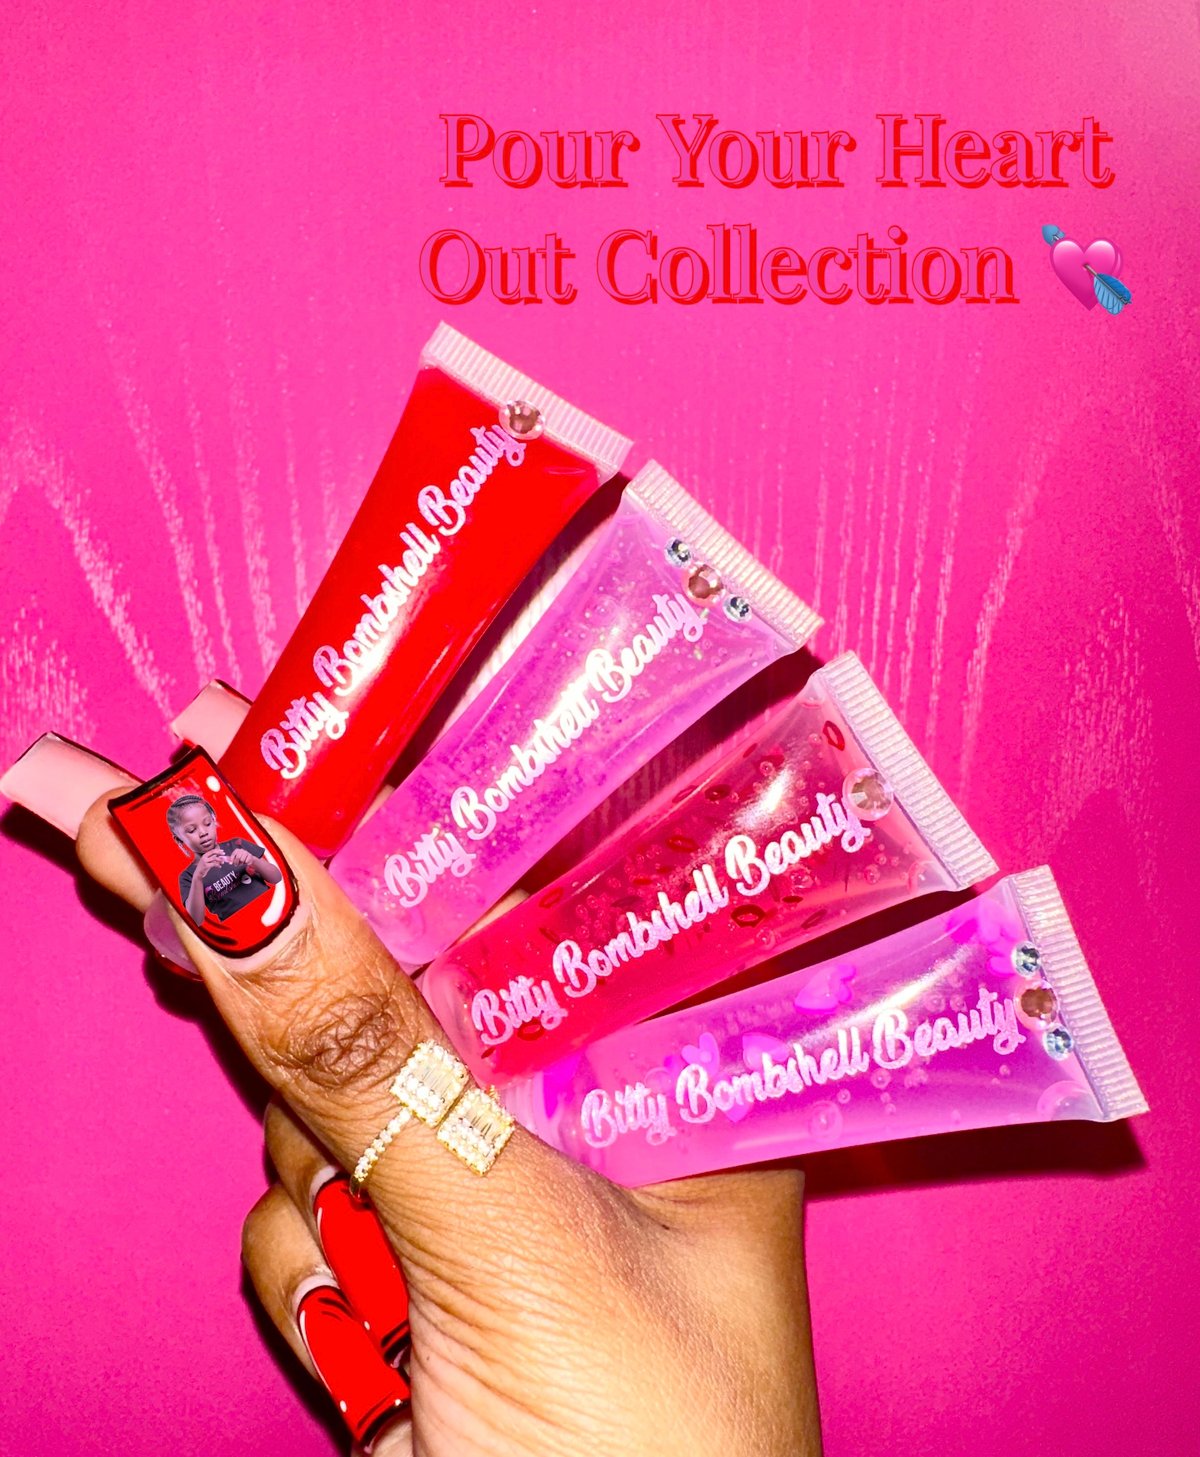 Pour Your Heart Out Collection ðŸ’˜ Buy one get one FREE 